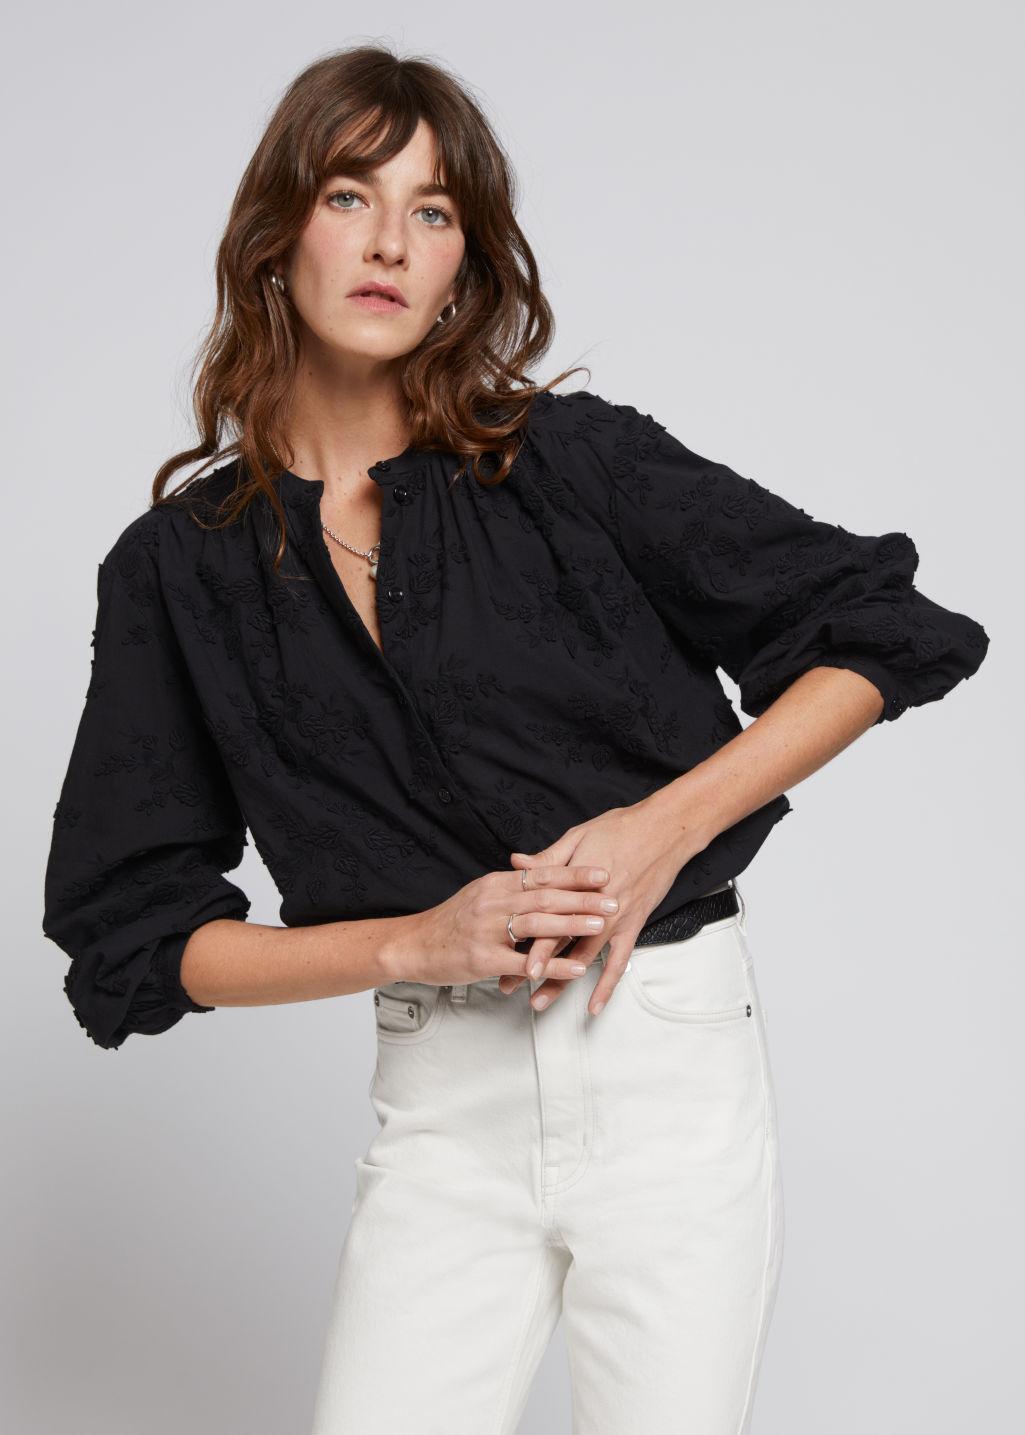 & Other Stories Voluminous Stand Collar Blouse in Black | Lyst